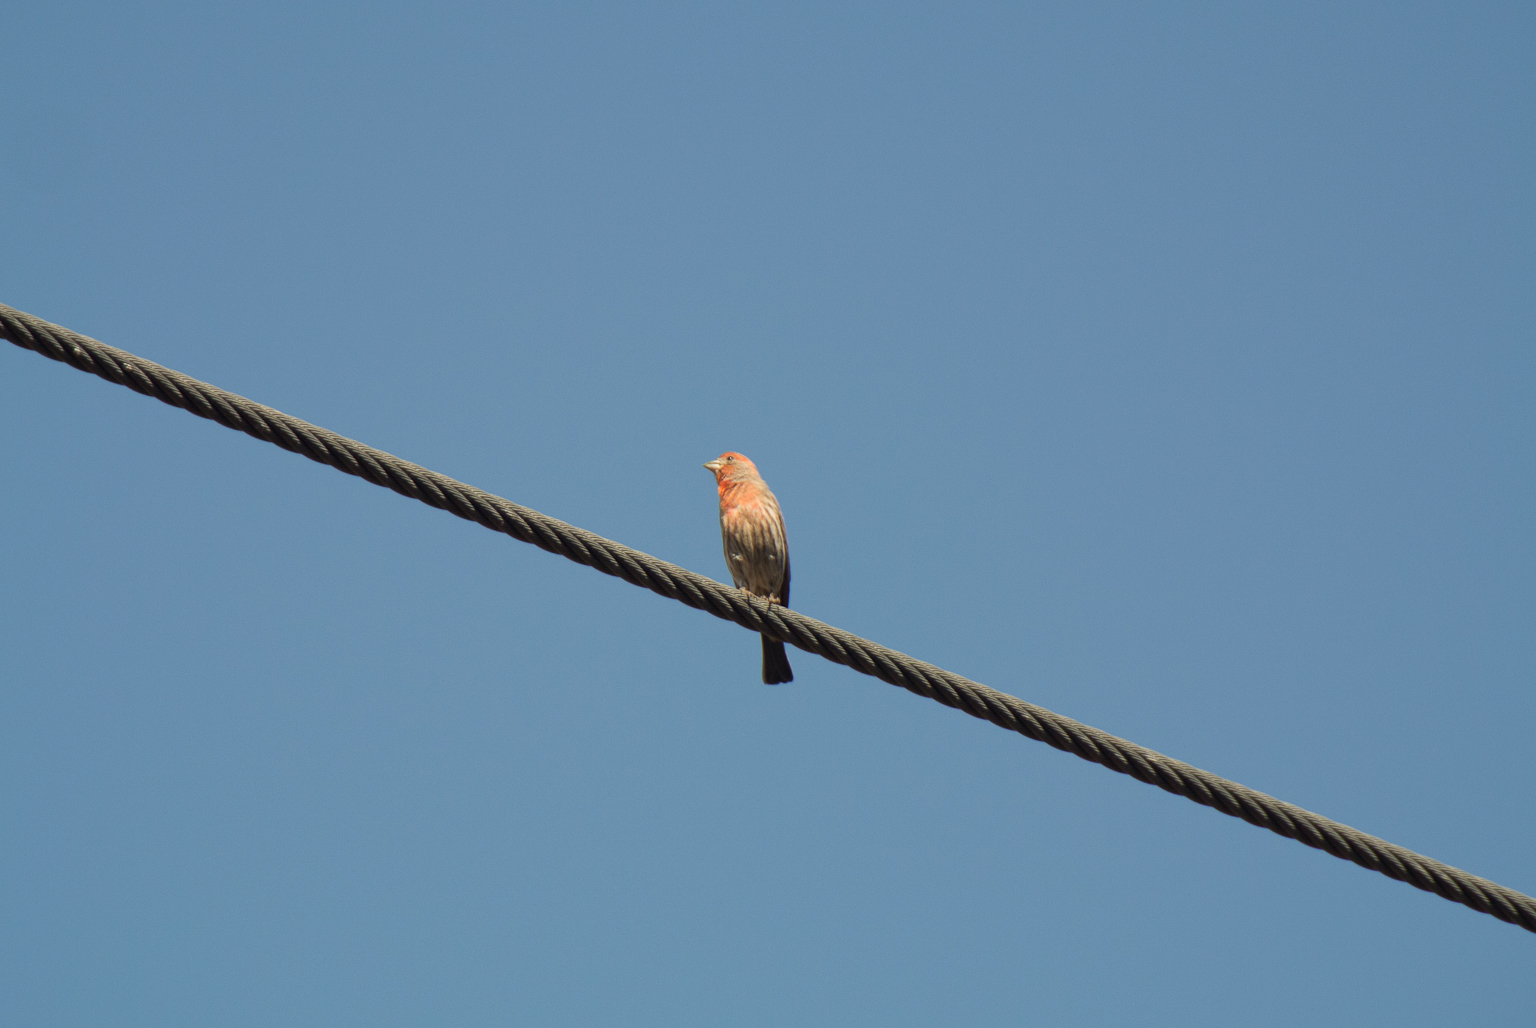 a small bird perched on a telephone wire